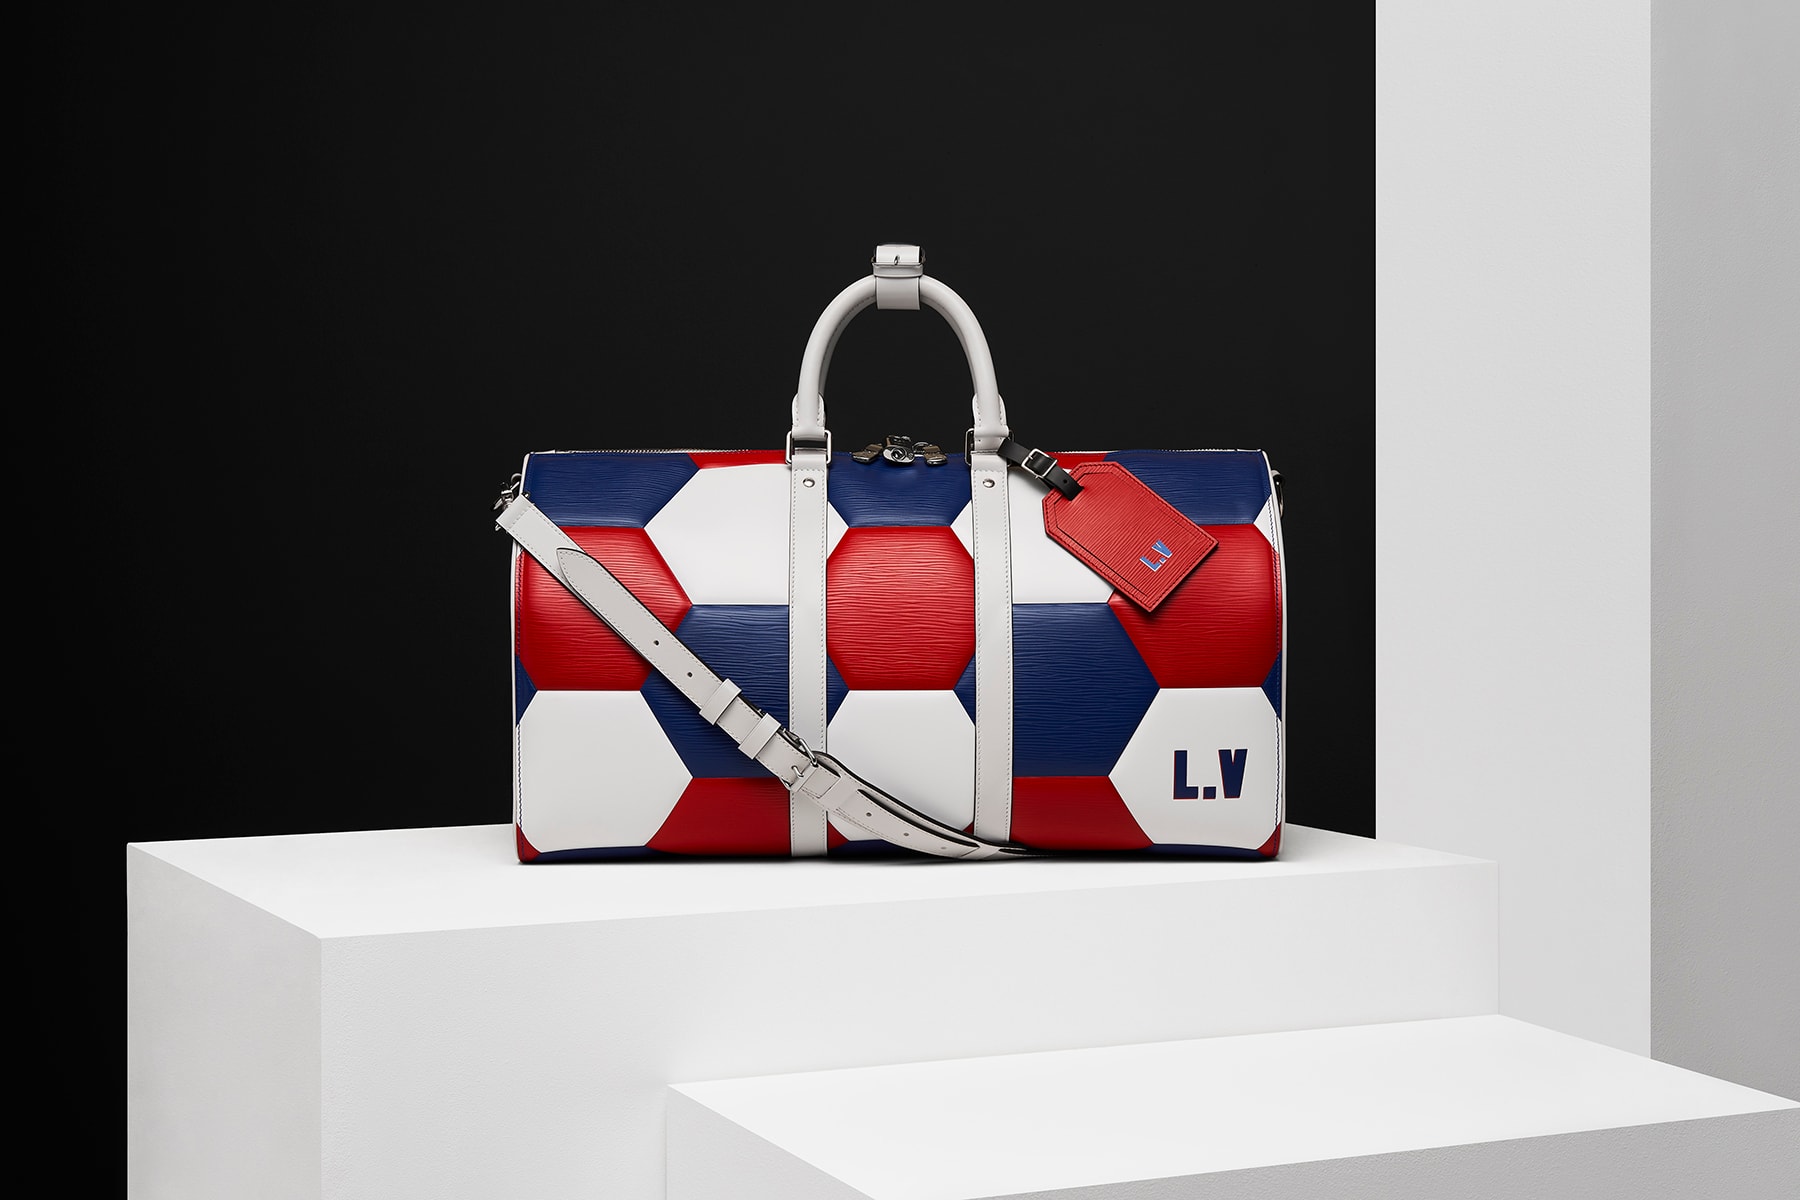 Louis Vuitton Limited Edition Black Epi Leather FIFA World Cup